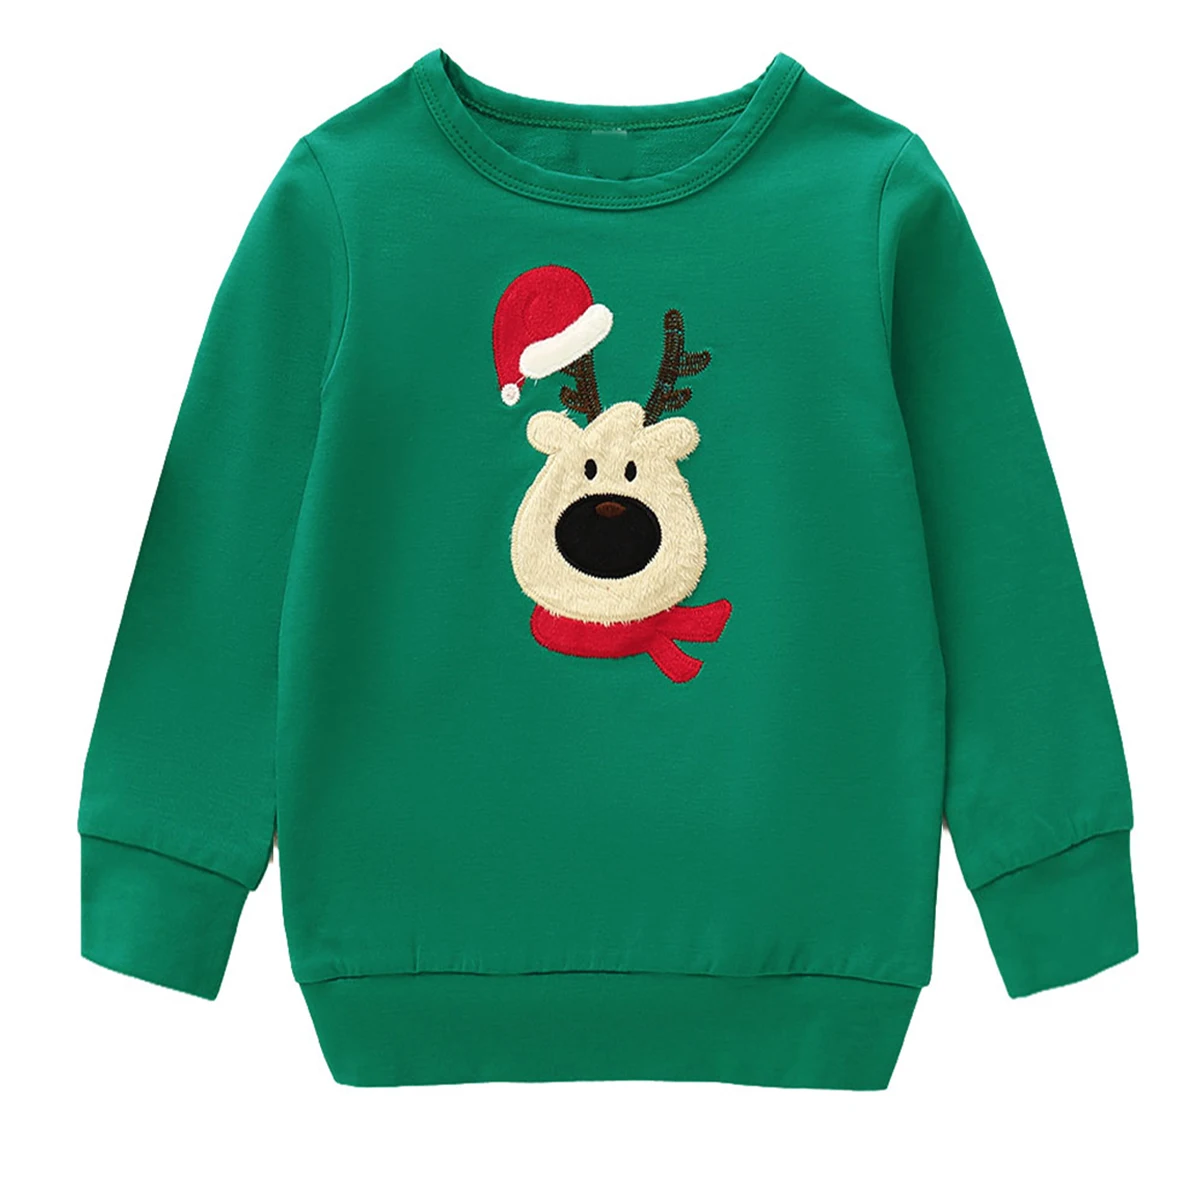 Christmas Clothes Mom Dad Kids Green deer head Long Sleeve Pullover Sweatshirt Jumper Family Matching Warm Autumn Casual Tops - Color: Dad M